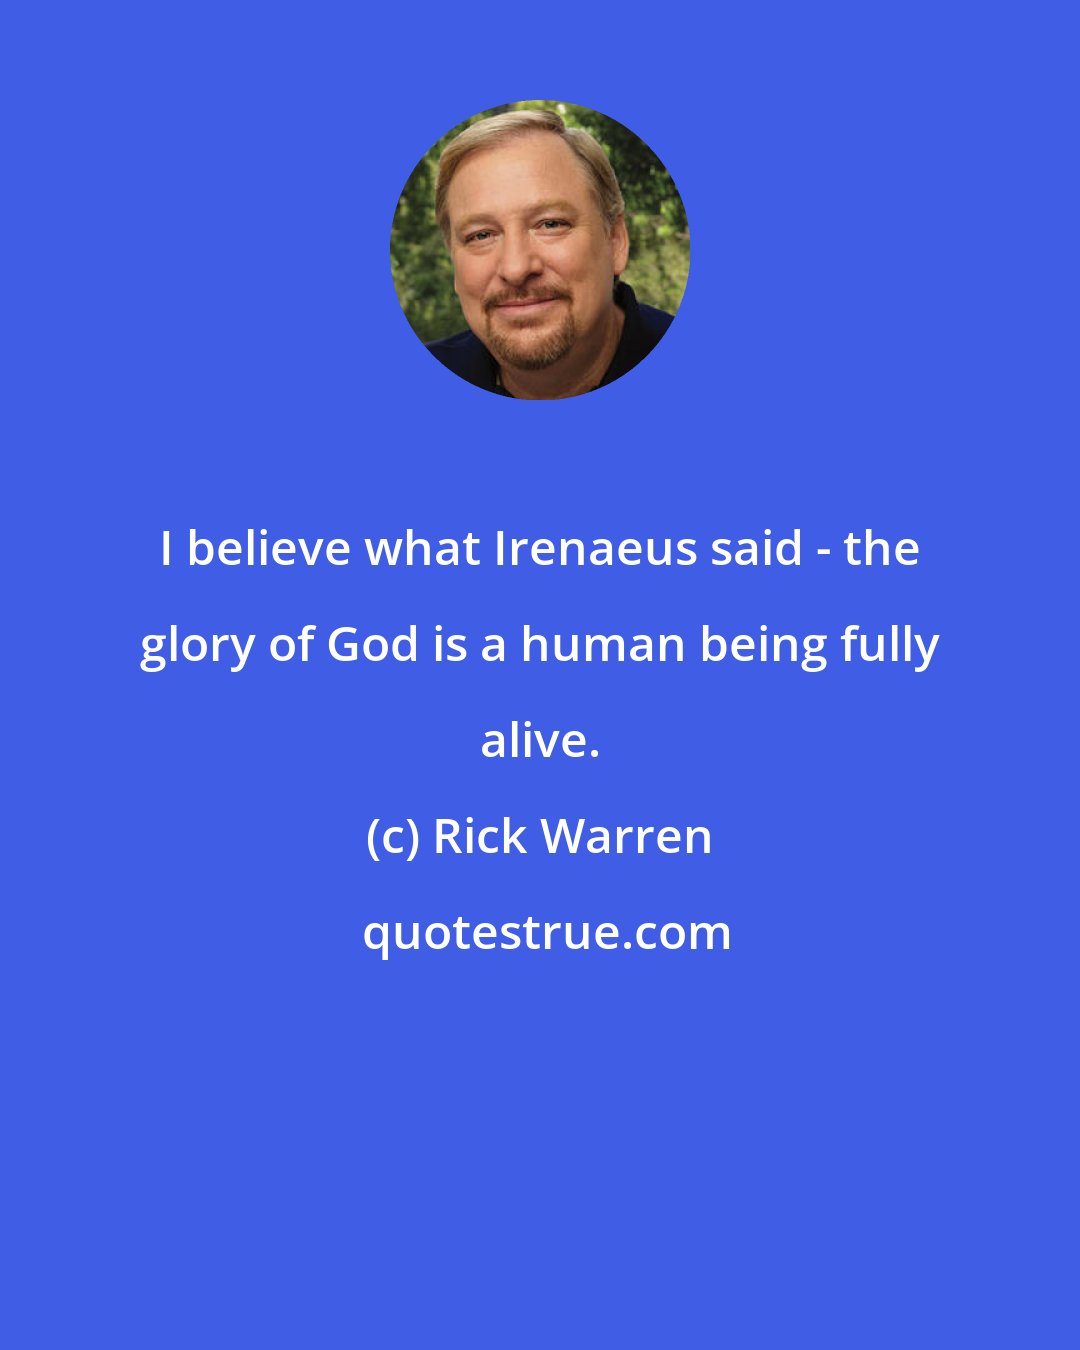 Rick Warren: I believe what Irenaeus said - the glory of God is a human being fully alive.